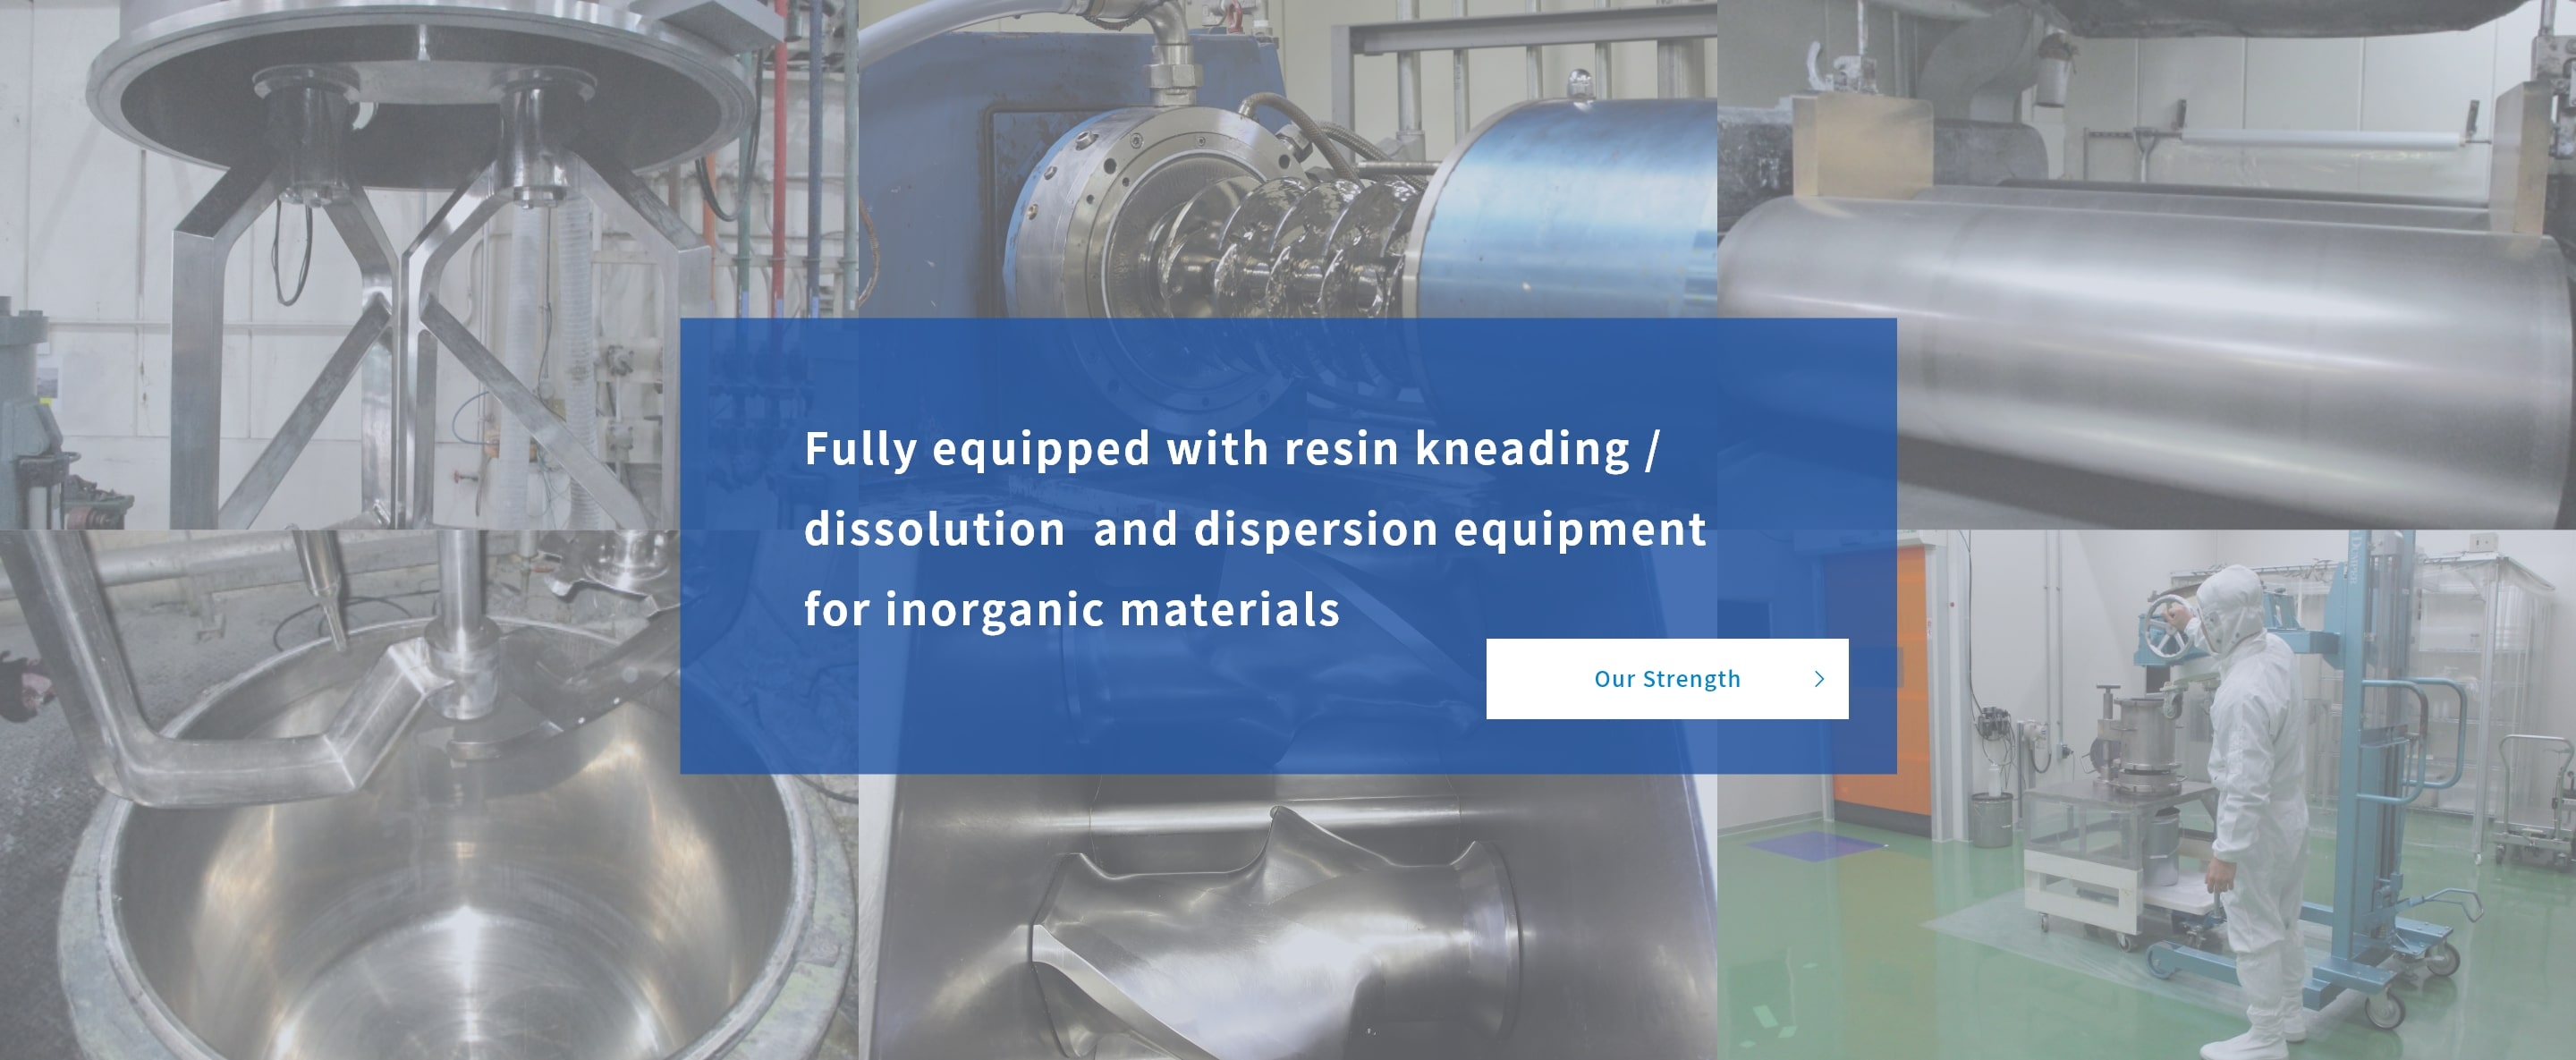 Fully equipped with resin kneading / dissolution and dispersion equipment for inorganic materials